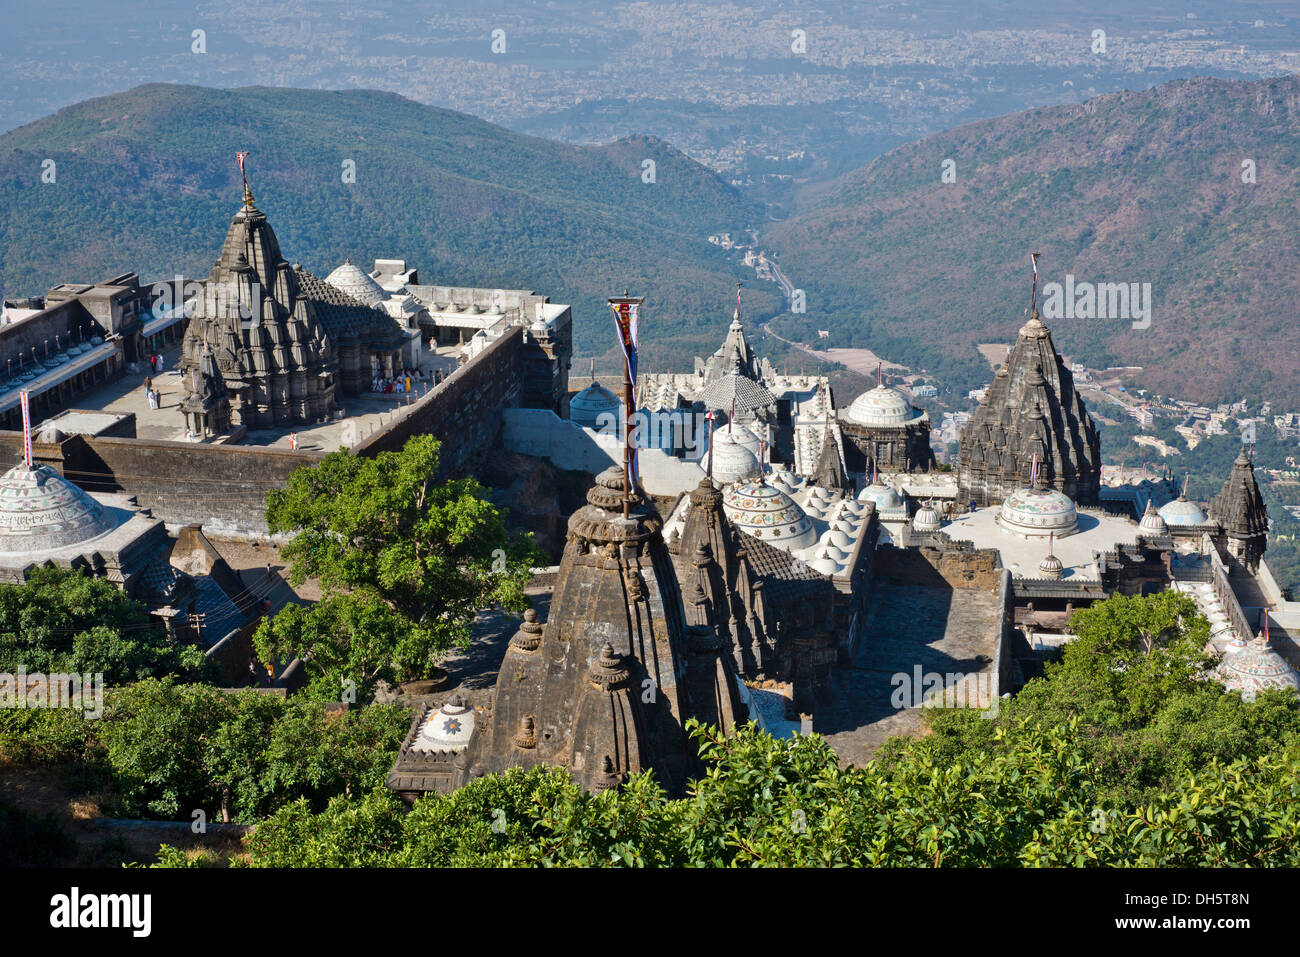 Temple on the holy mountain of Girnar, important pilgrimage site for the followers of Jainism, Junagadh, Gujarat, India Stock Photo